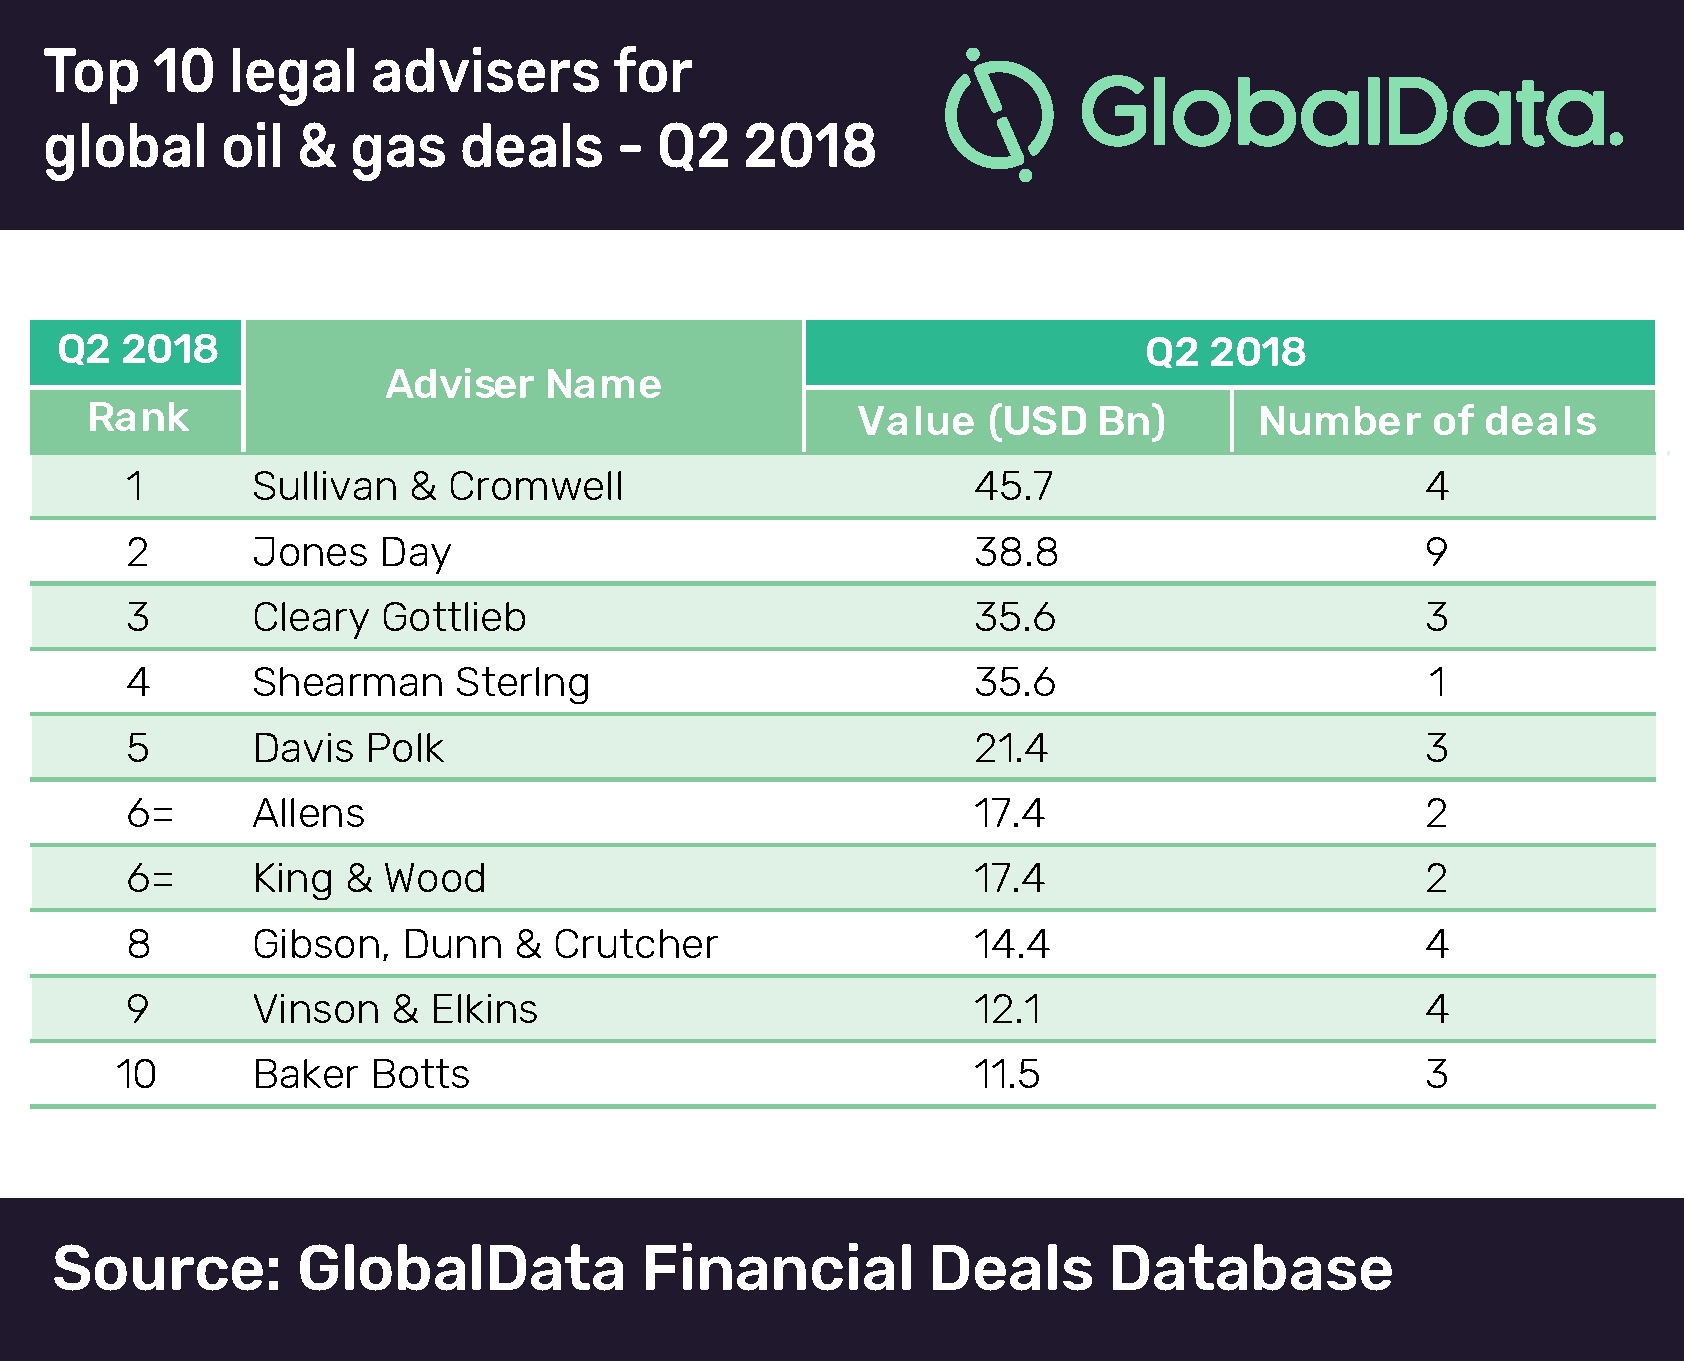 Morgan Stanley Leads Oil & Gas Sector in M&A Financial Advisers Ranking, Q2 2018 